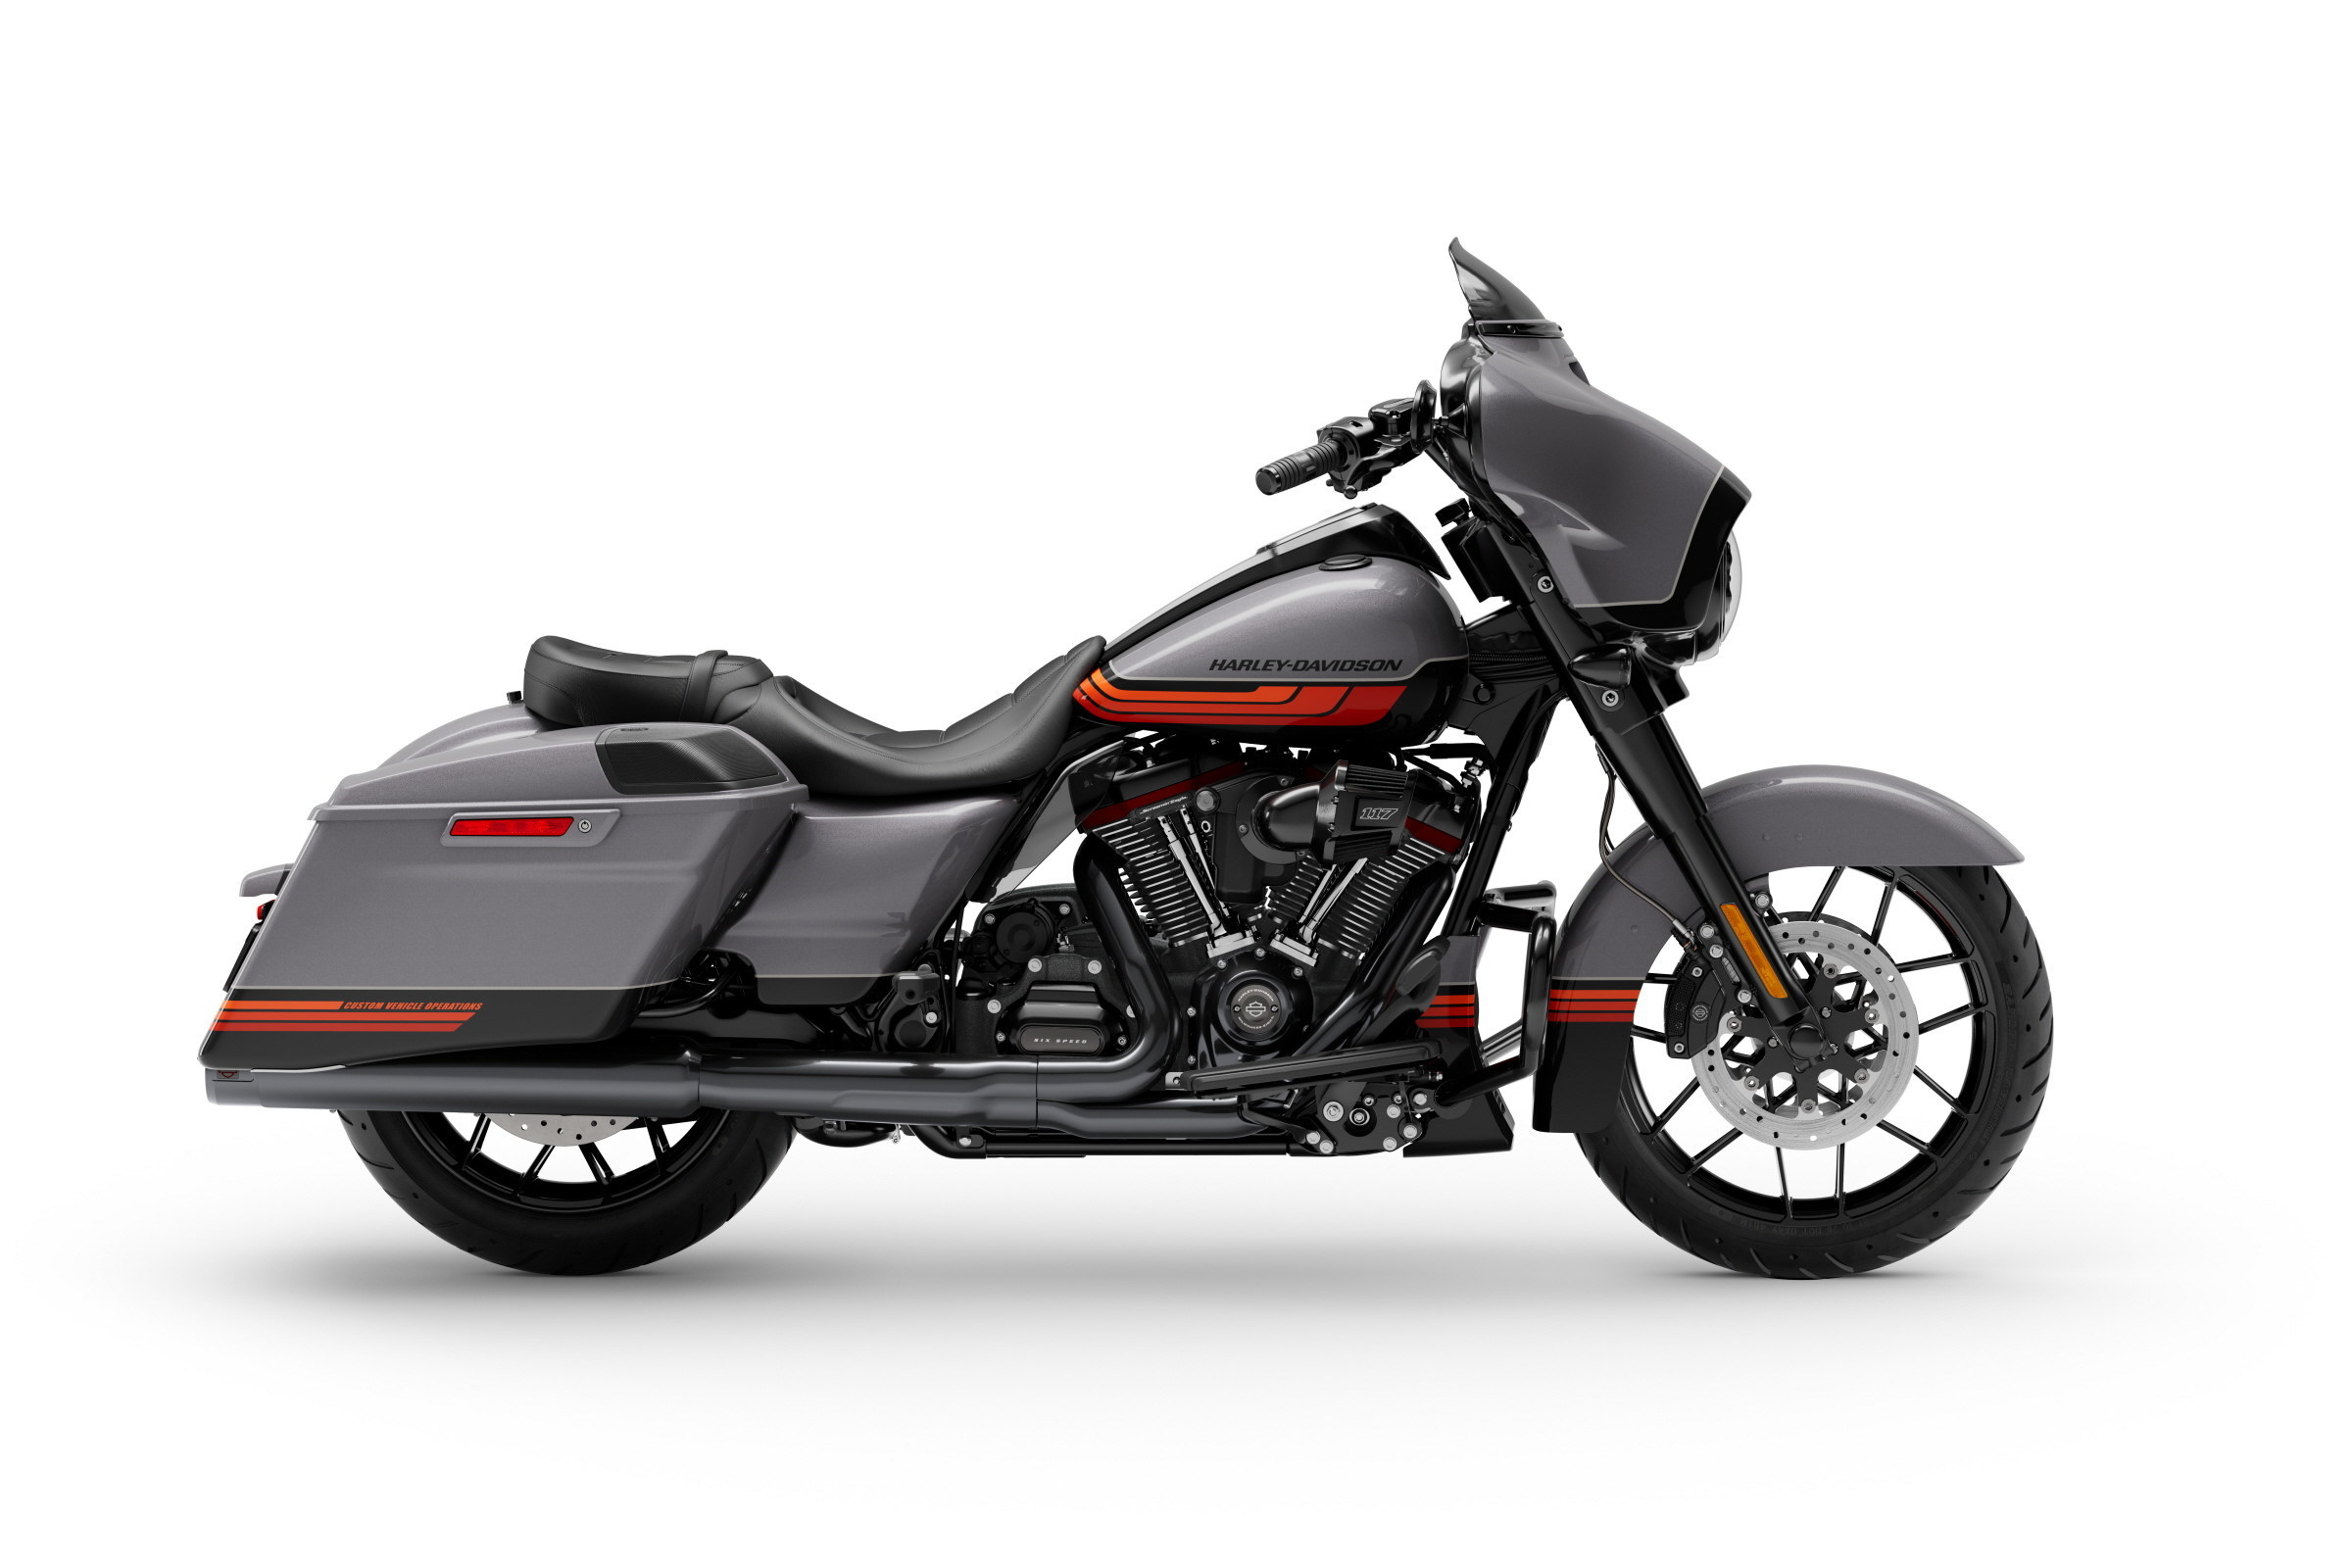 Harley Davidson Launches New Motorcycle Models And Technology For 2020